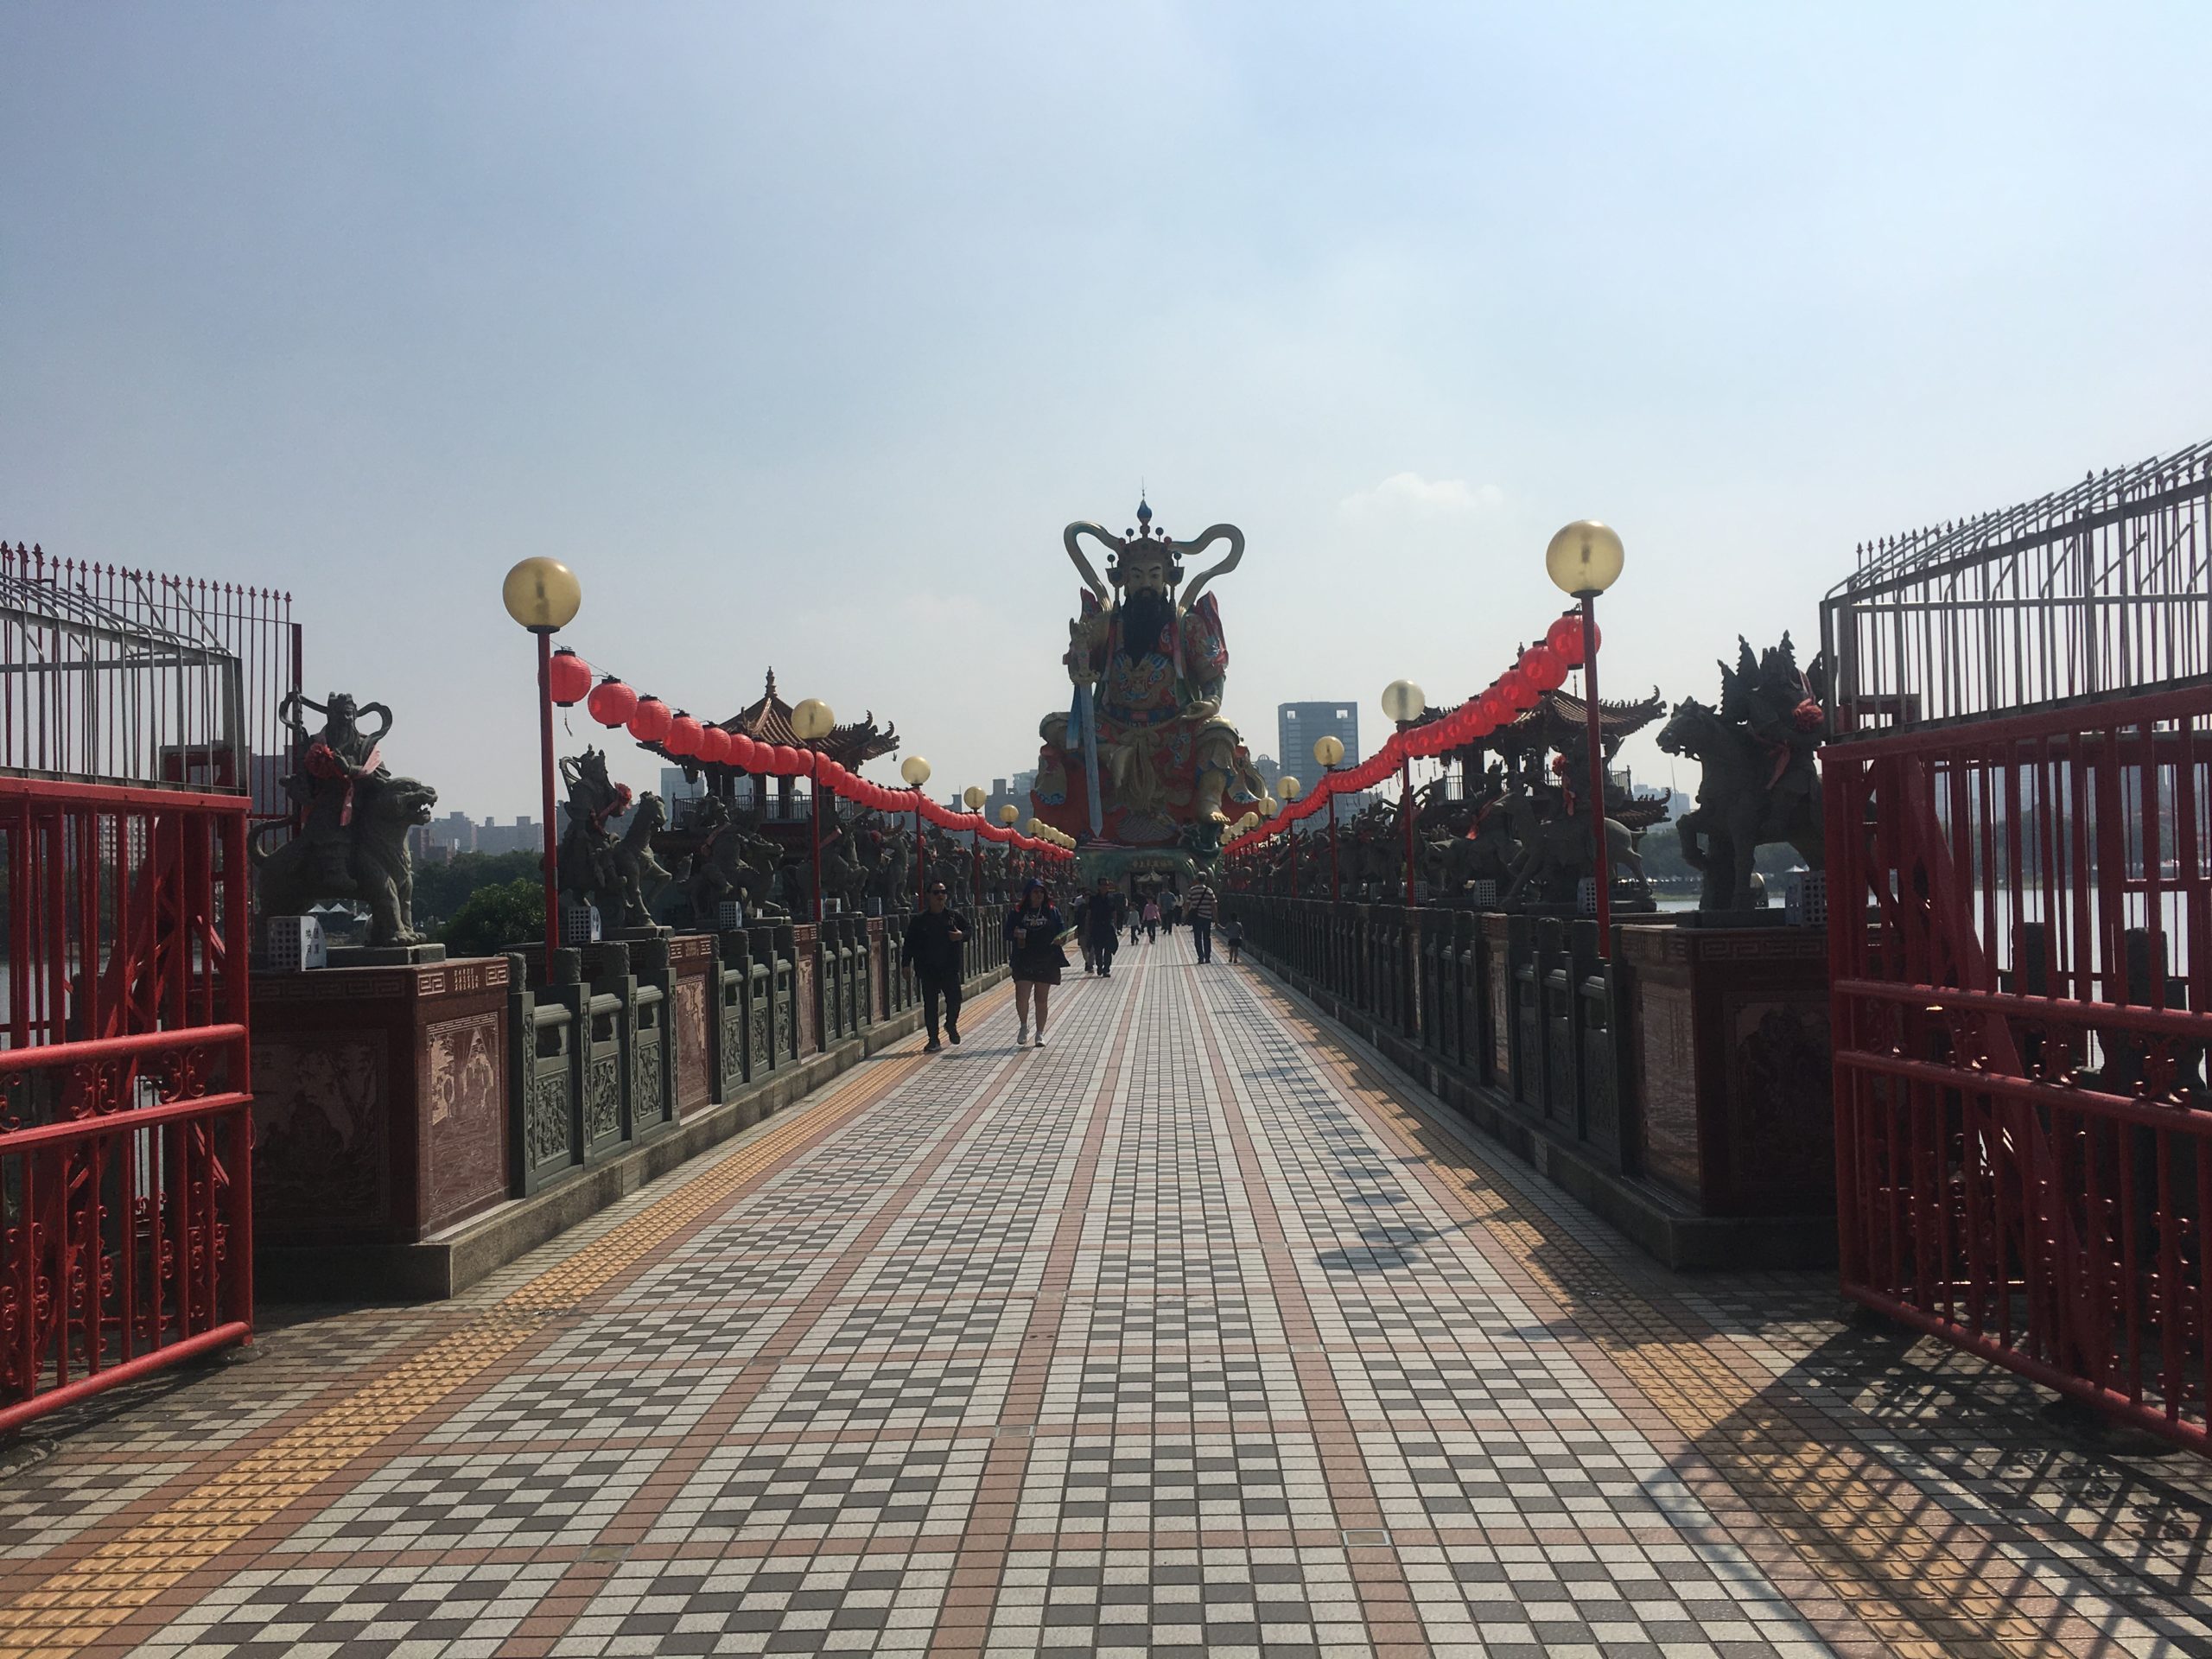 The bridge to this temple is guarded by a pantheon of Gods riding different animals